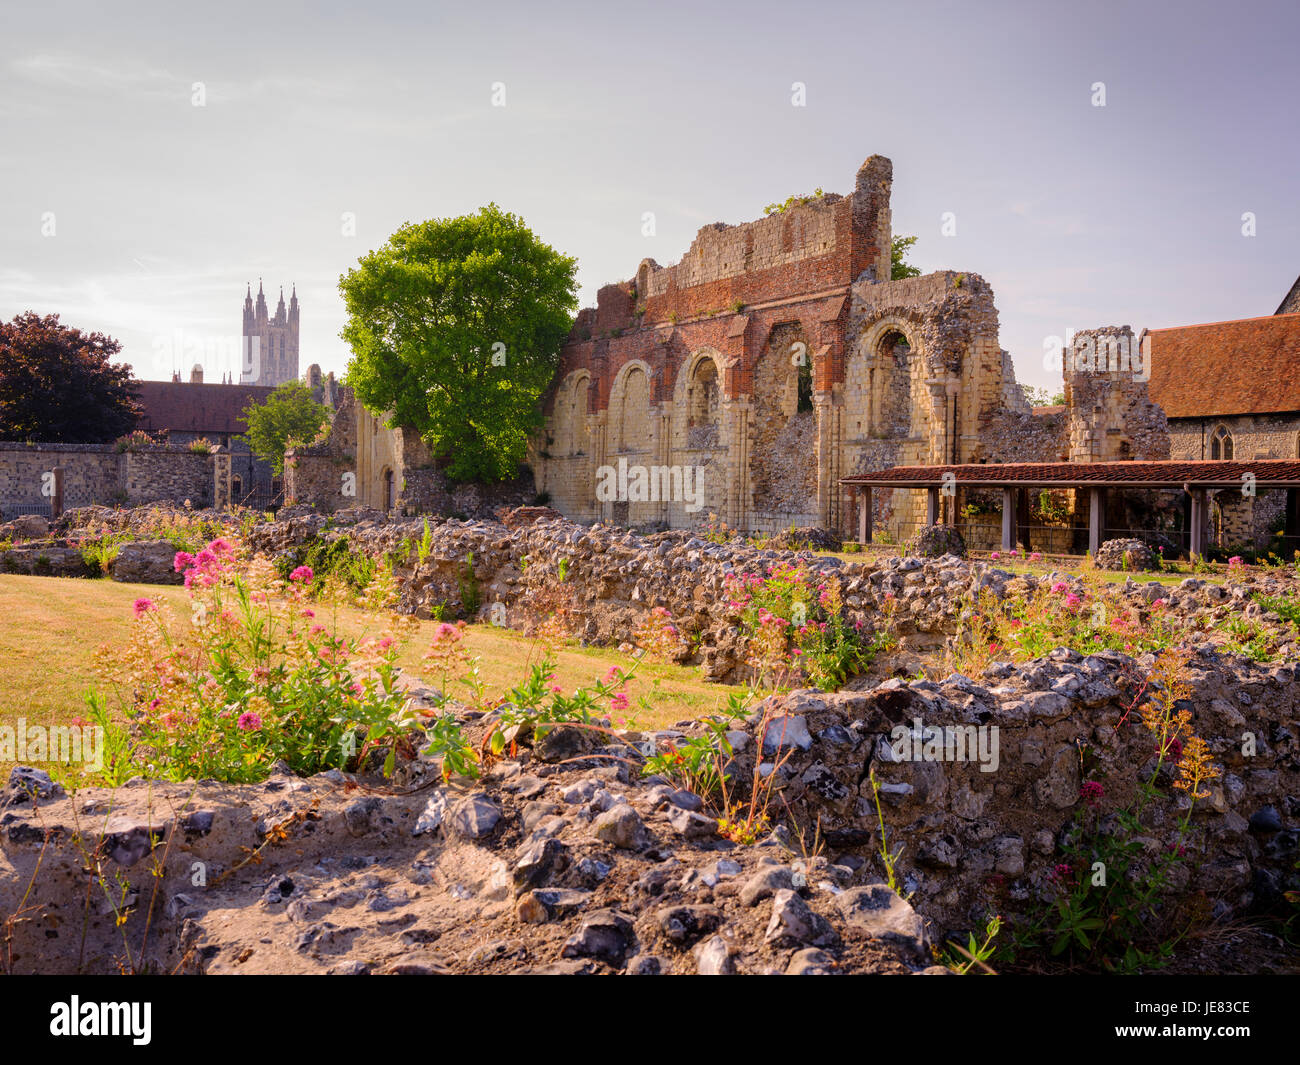 Picture taken 19/06/17 Embargoed until 00.01 23/06/17: St Augustine’s Abbey – part of Canterbury’s World Heritage site - has been ‘rebuilt’ in virtual reality as part of a collaboration between English Heritage and the University of Kent. From 24th June, visitors will be able to sit in a new pod in the visitor centre and experience a virtual tour through the ornate and brightly decorated buildings as they would likely have been in the early 16th century, just before their destruction by Henry VIII.  This will be the first time VR has been used at an English Heritage site Stock Photo